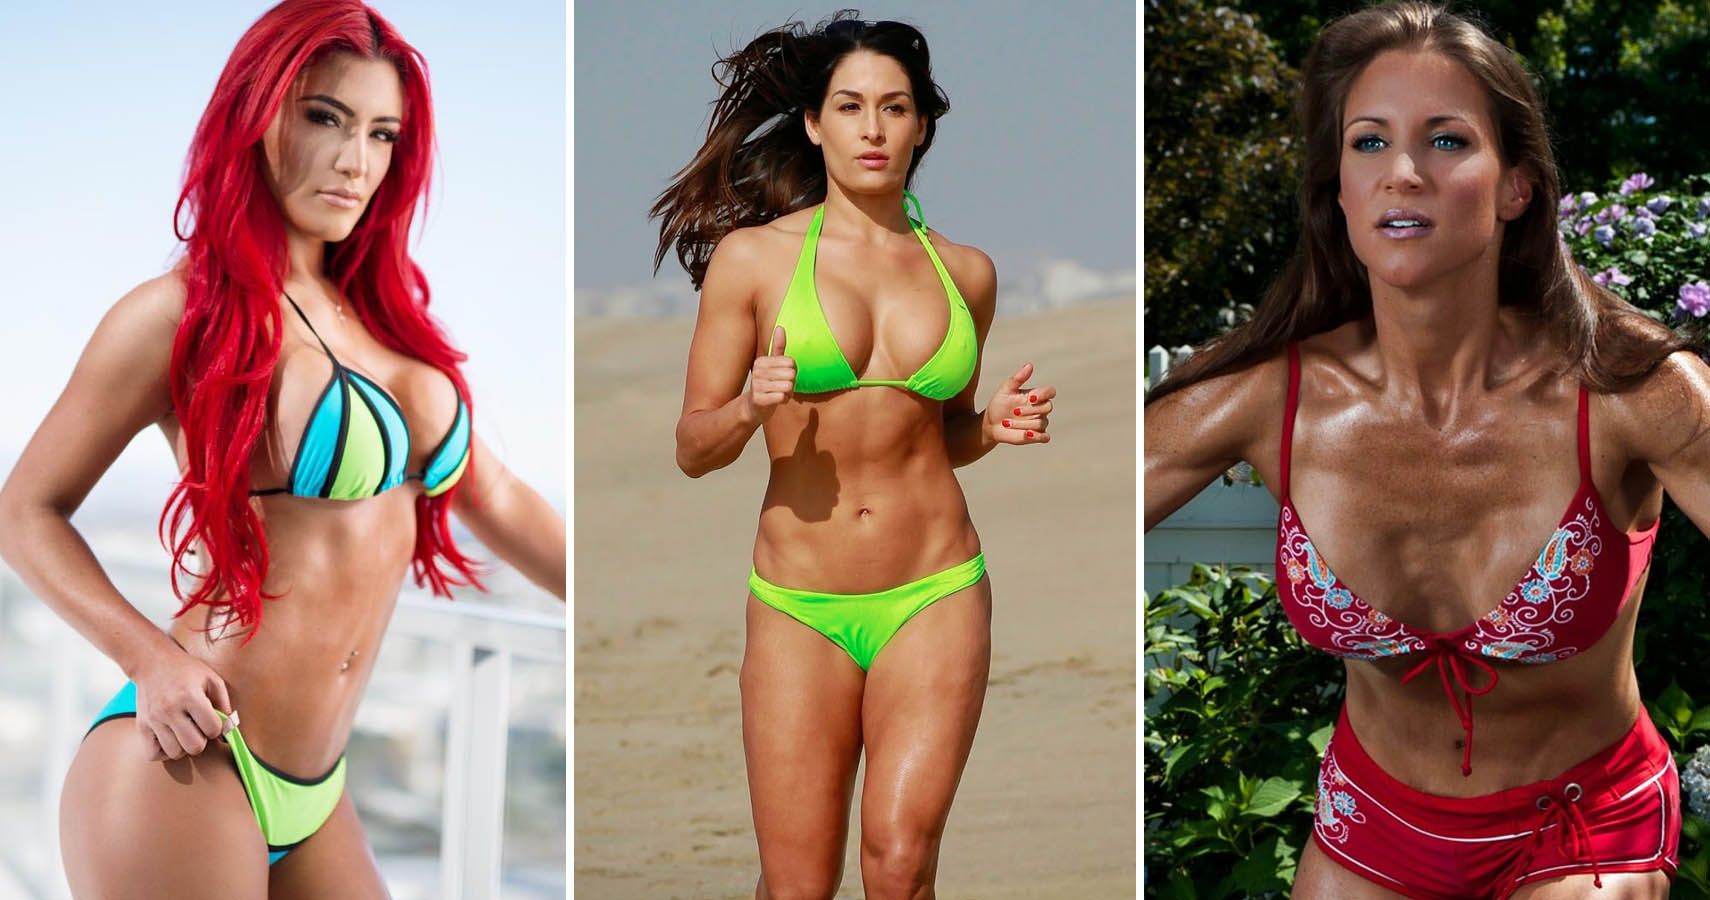 denny neufeld recommends hot wwe wrestlers female pic